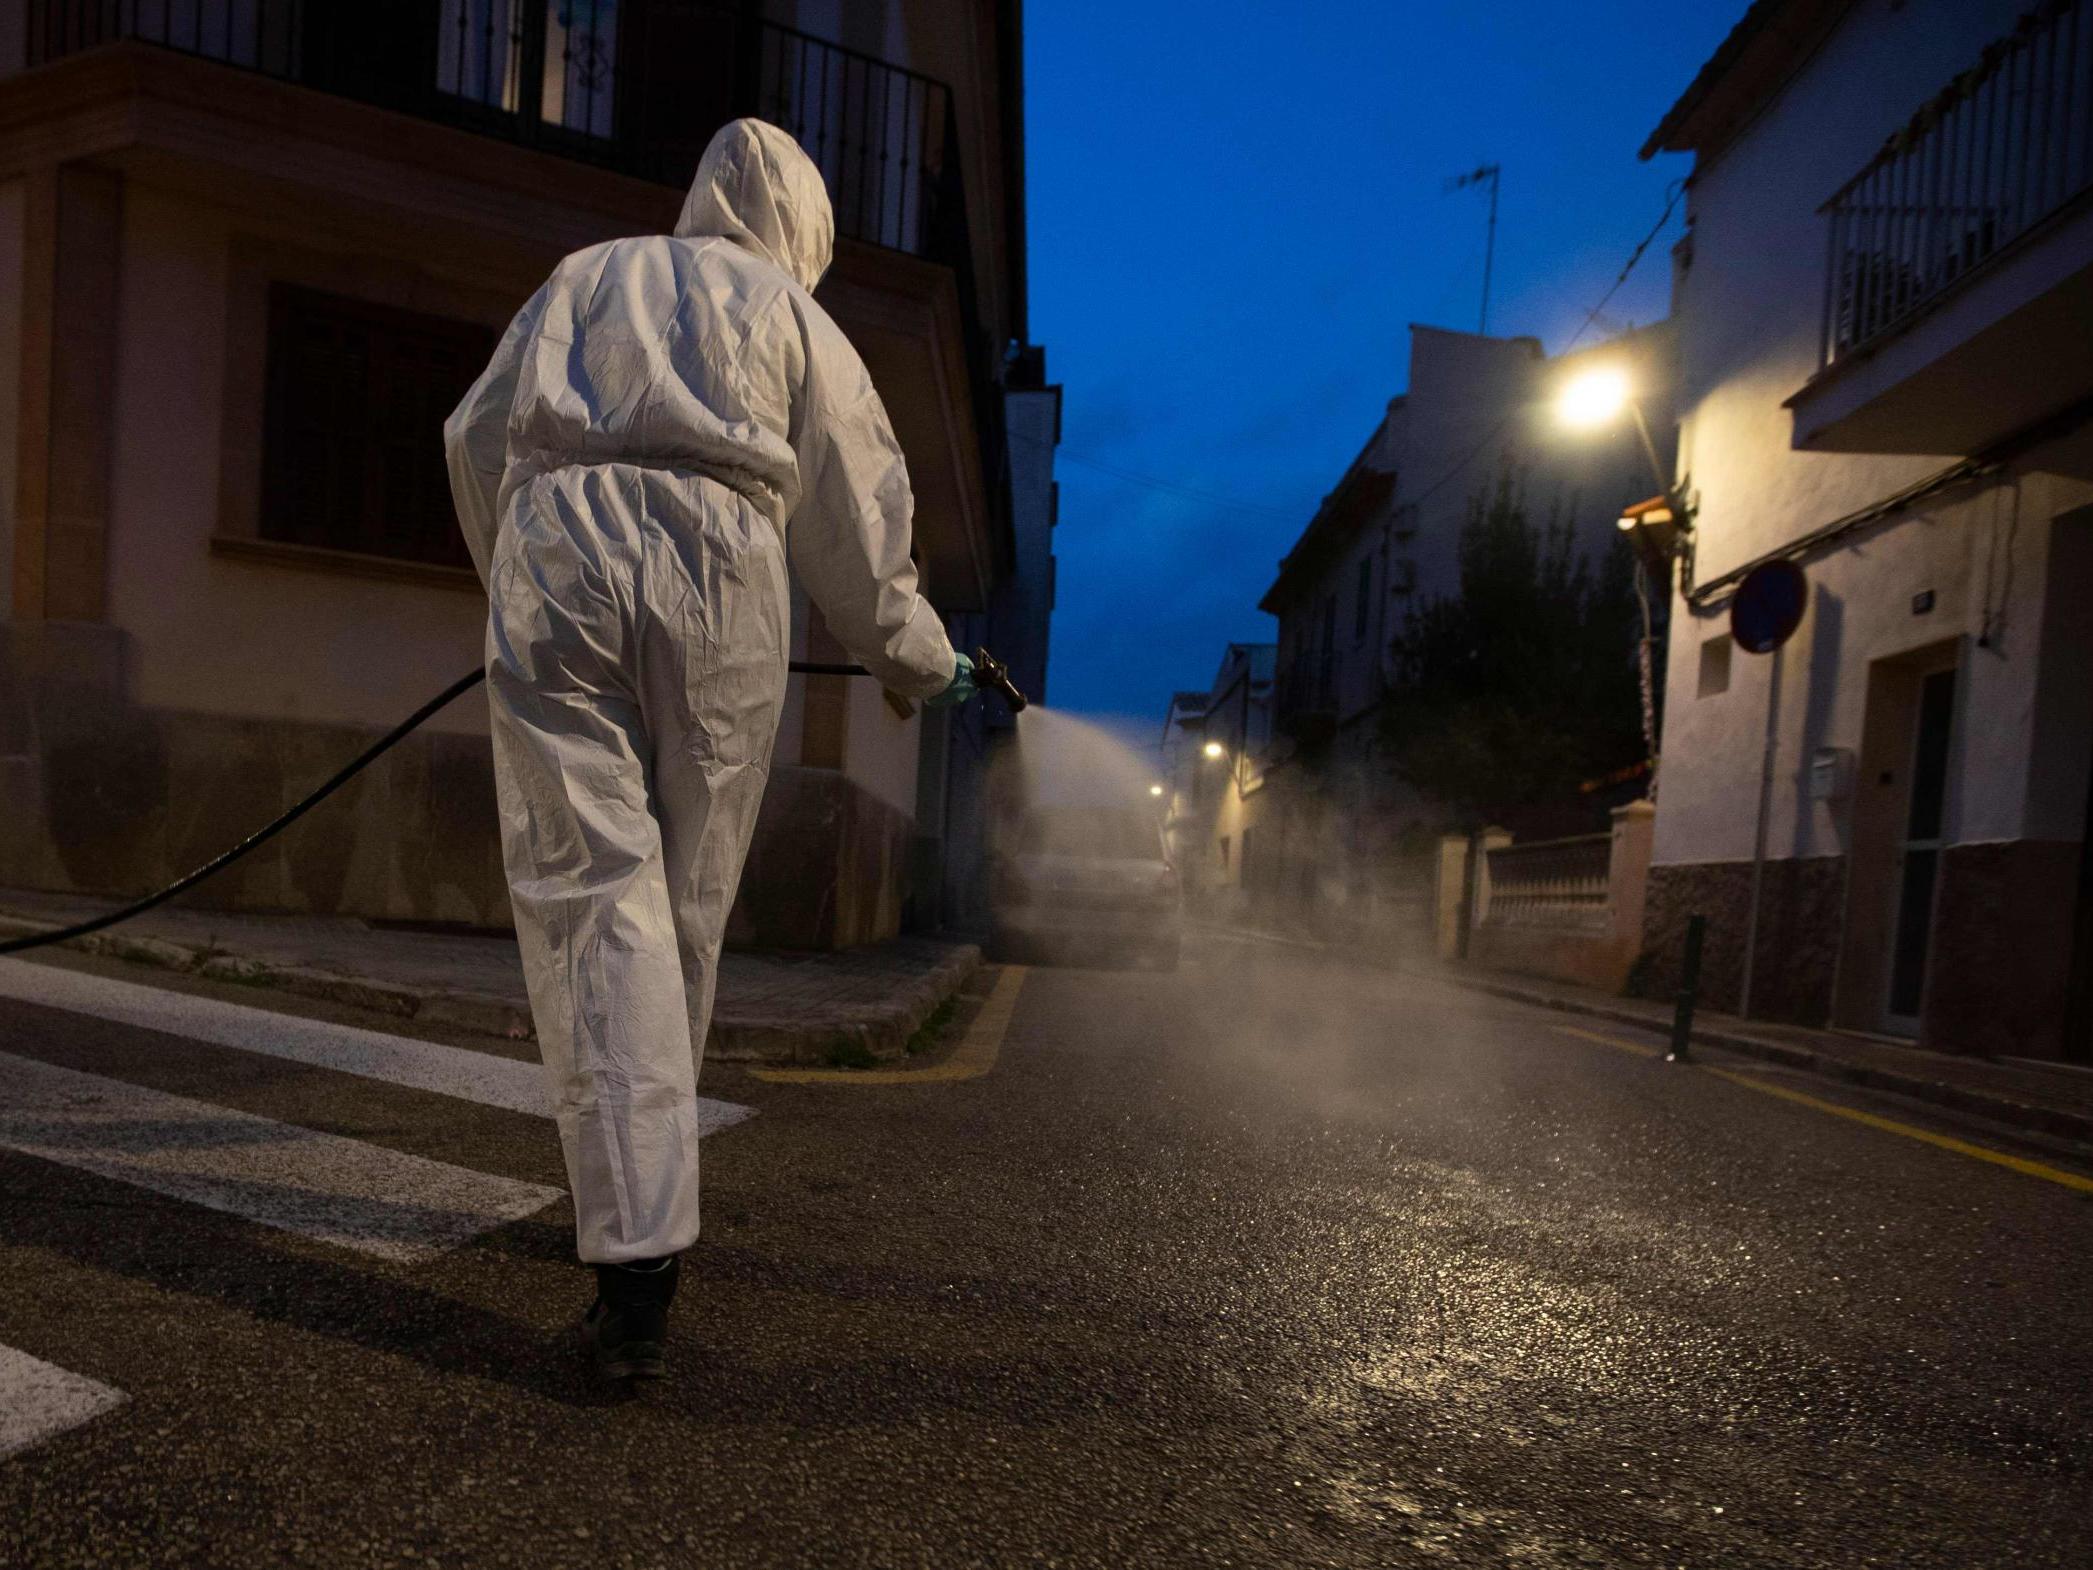 A volunteer farmer caries out a disinfection in the town of Sant Jordi, on the Balearic island of Mallorca on 10 April, during a national lockdown to prevent the spread of the COVID-19 disease